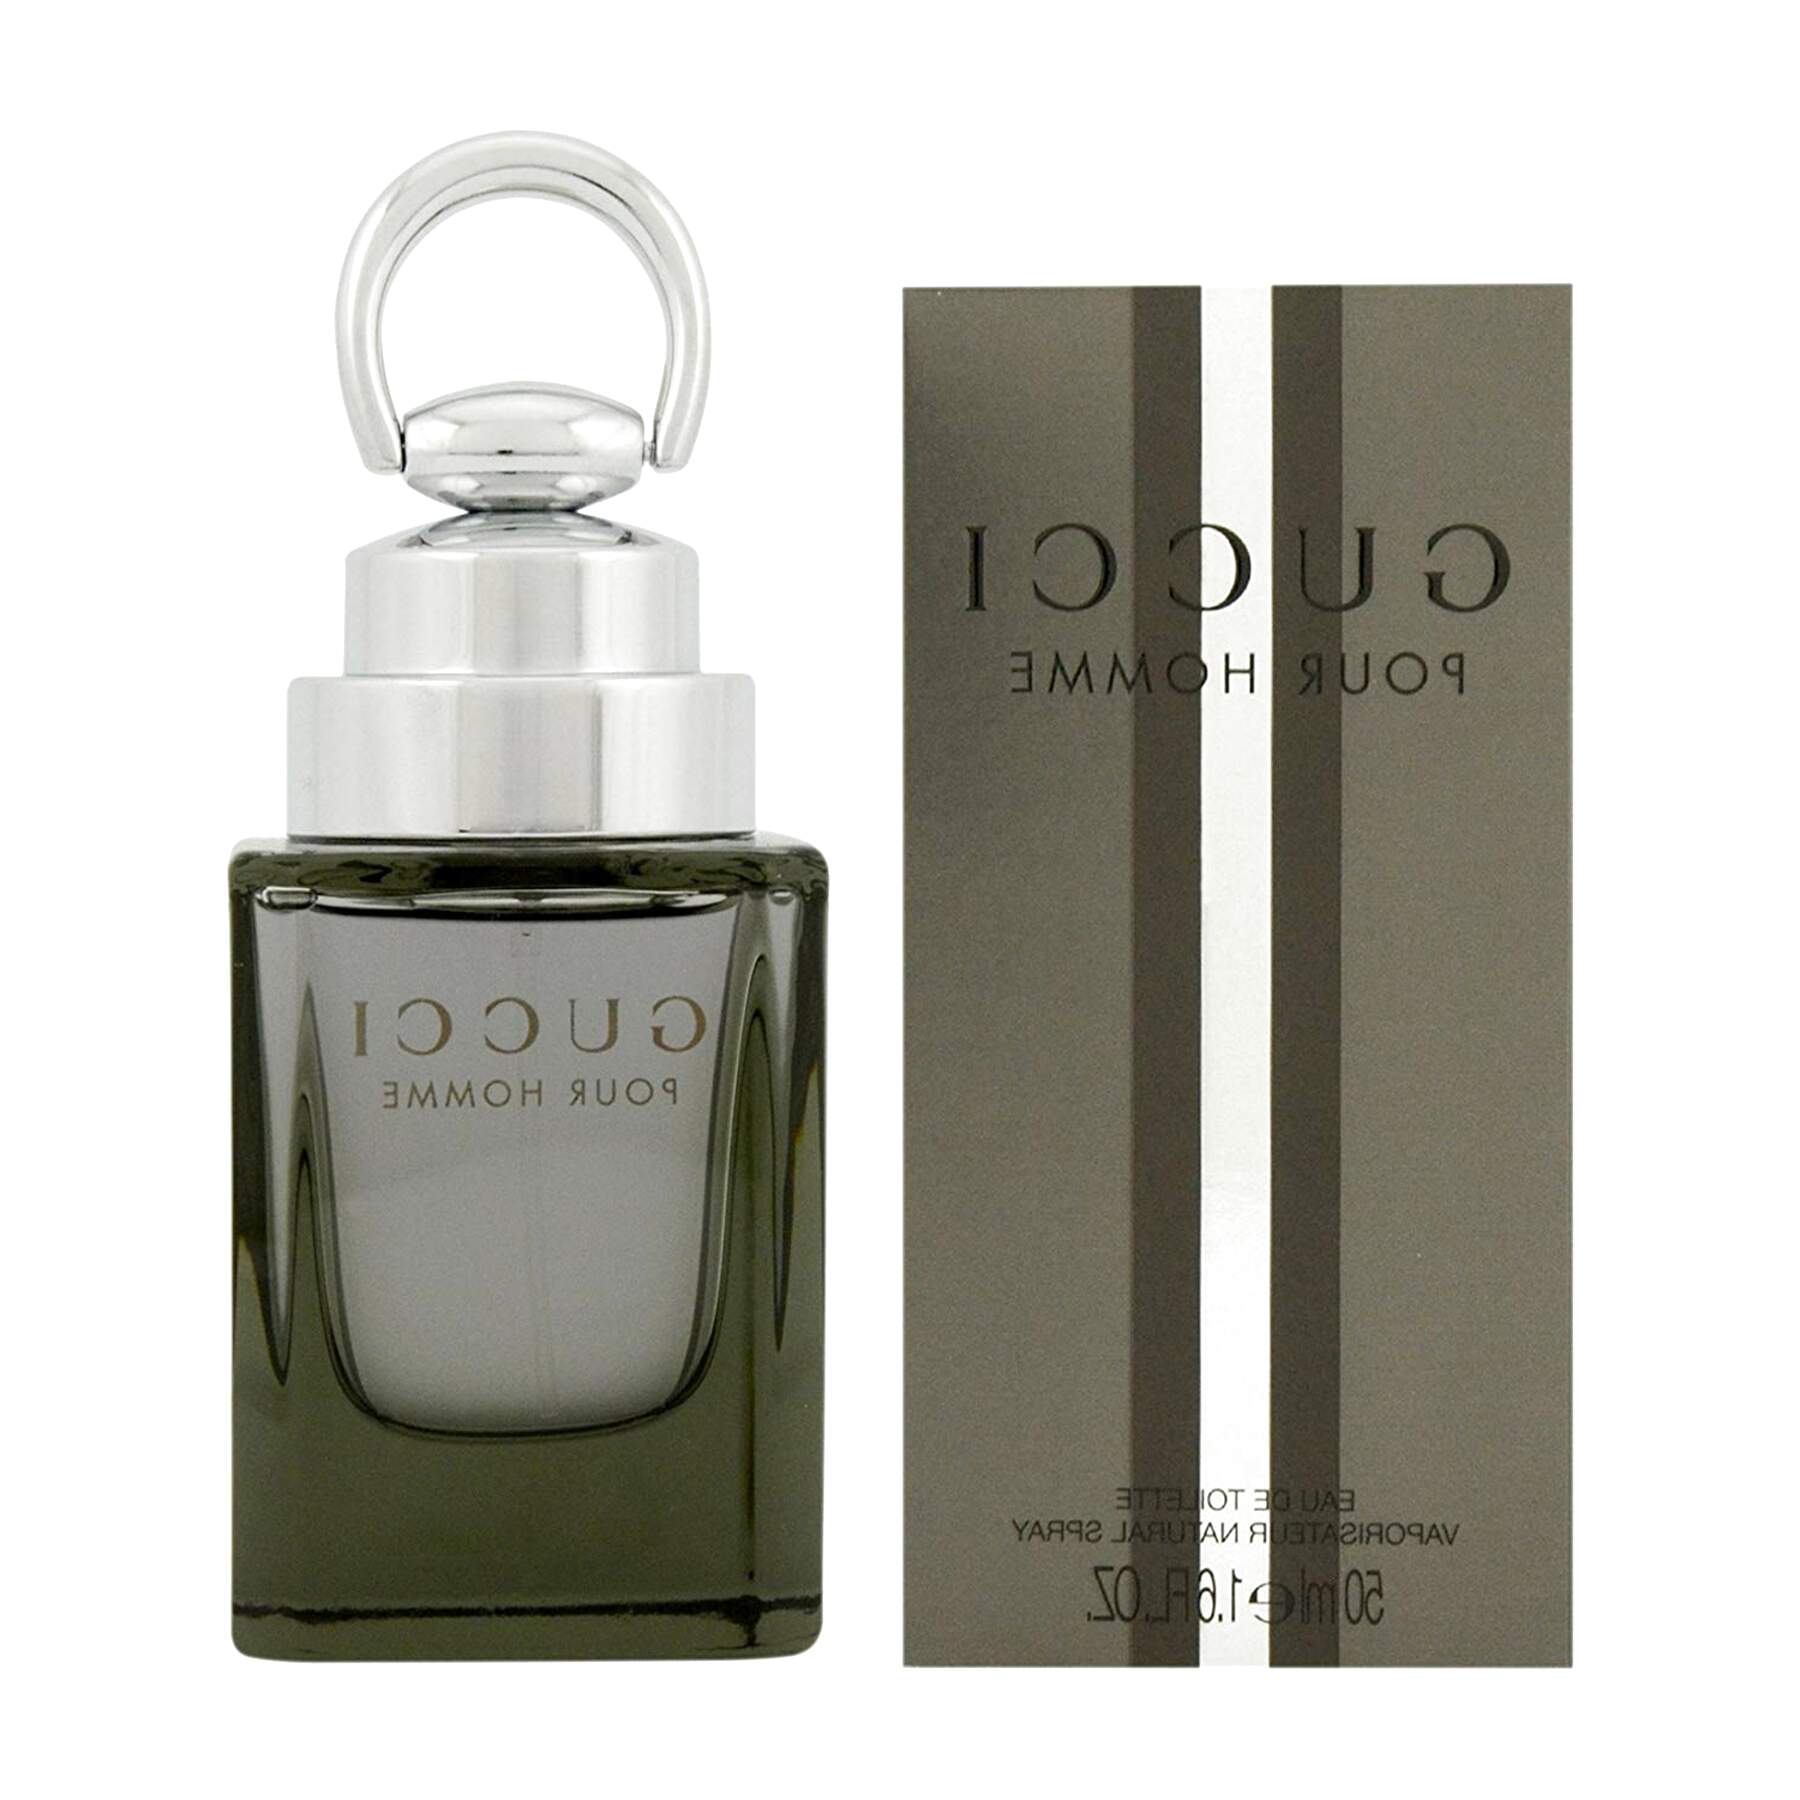 Gucci Pour Homme for sale in UK | View 37 bargains